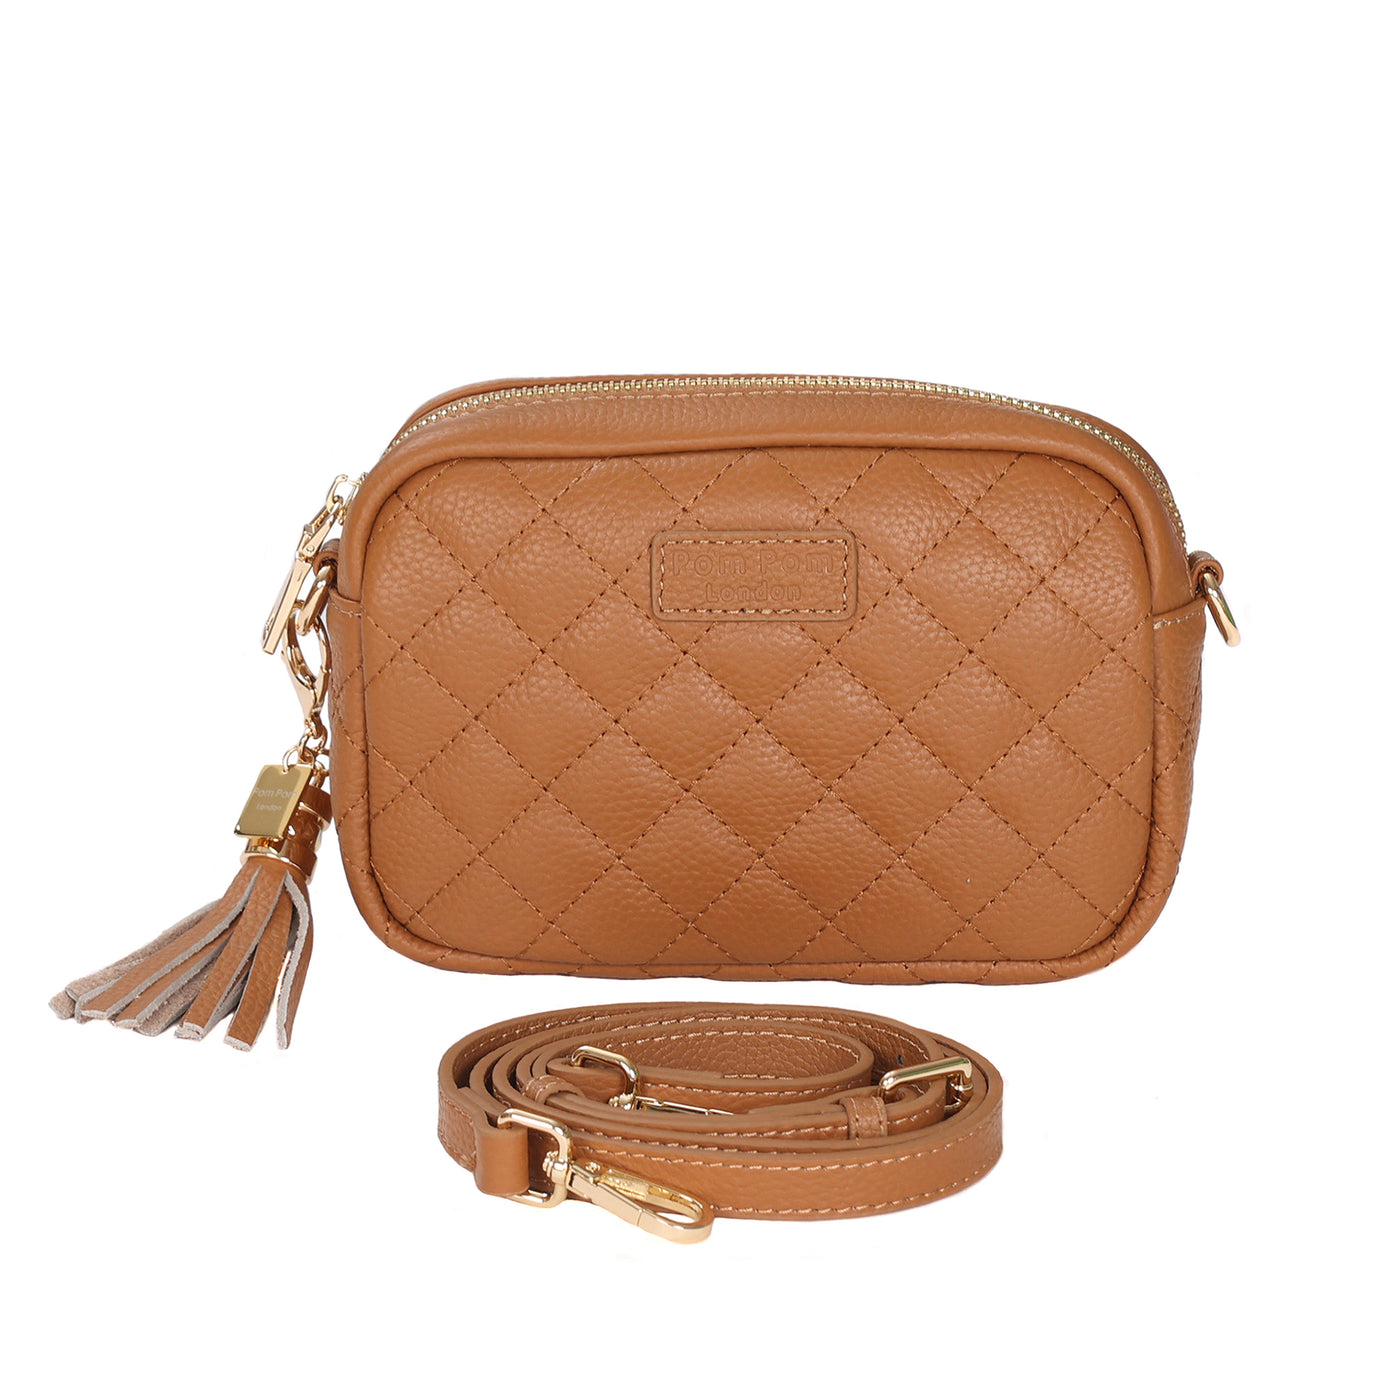 Quilted City MINI Bag Maple & Accessories - Pom Pom London